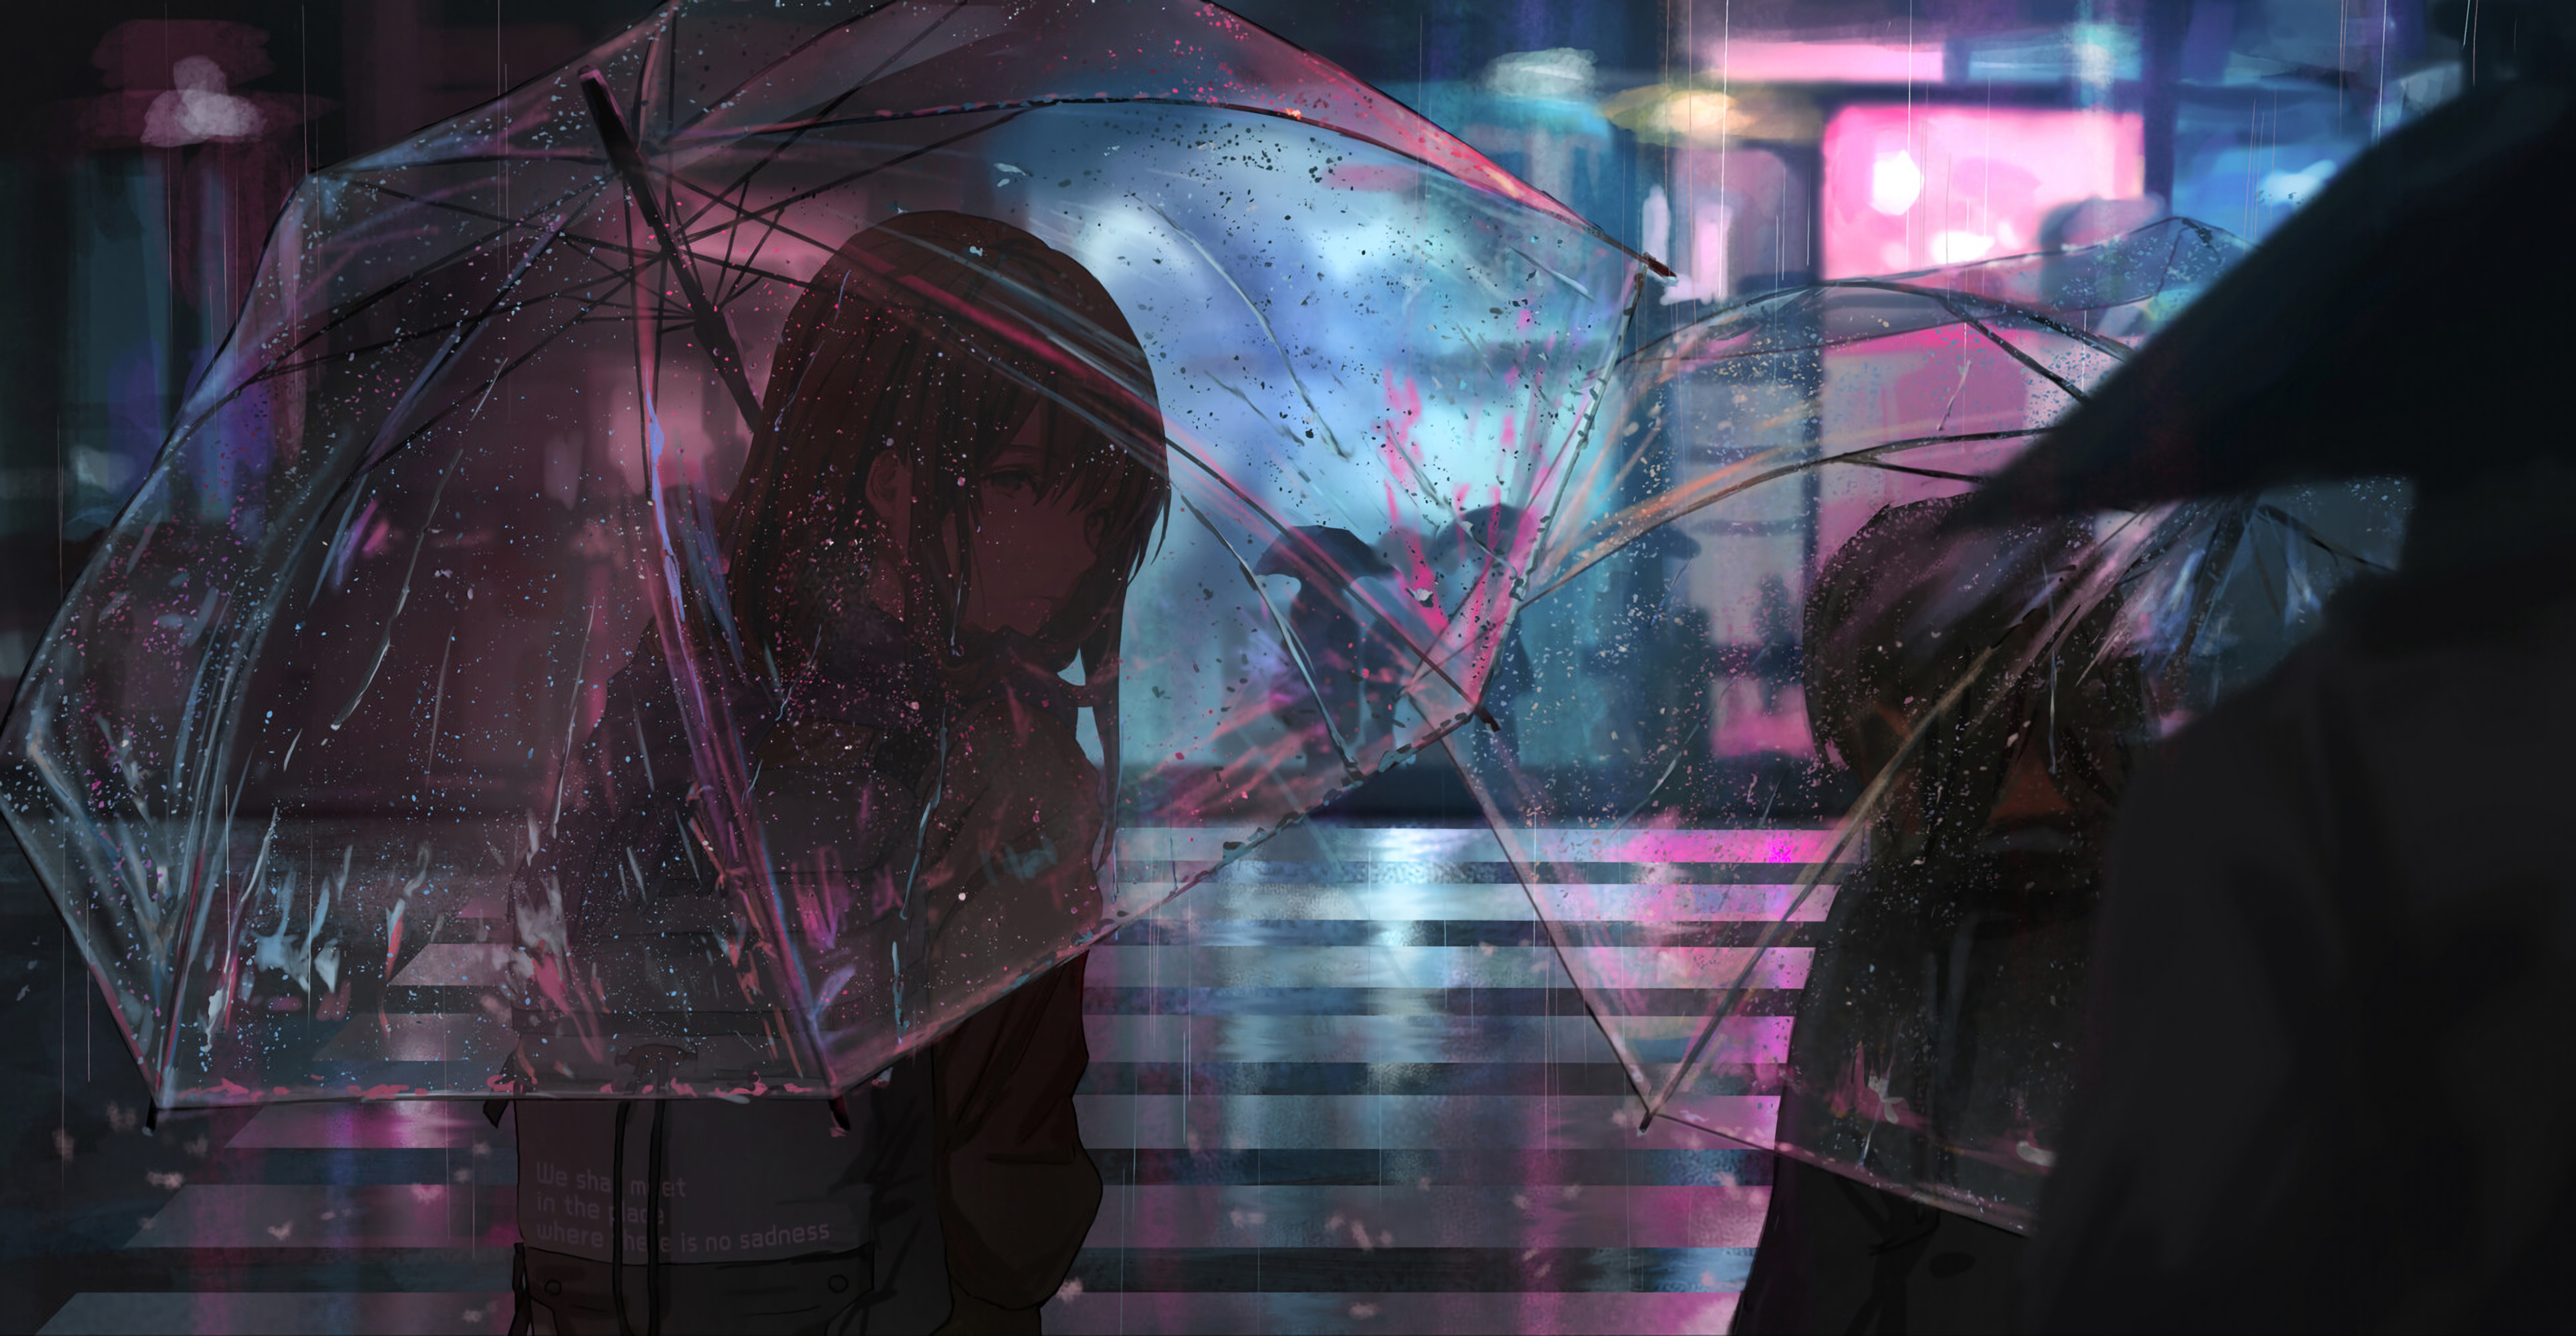 112790 download wallpaper anime, night, rain, girl, umbrella, street screensavers and pictures for free